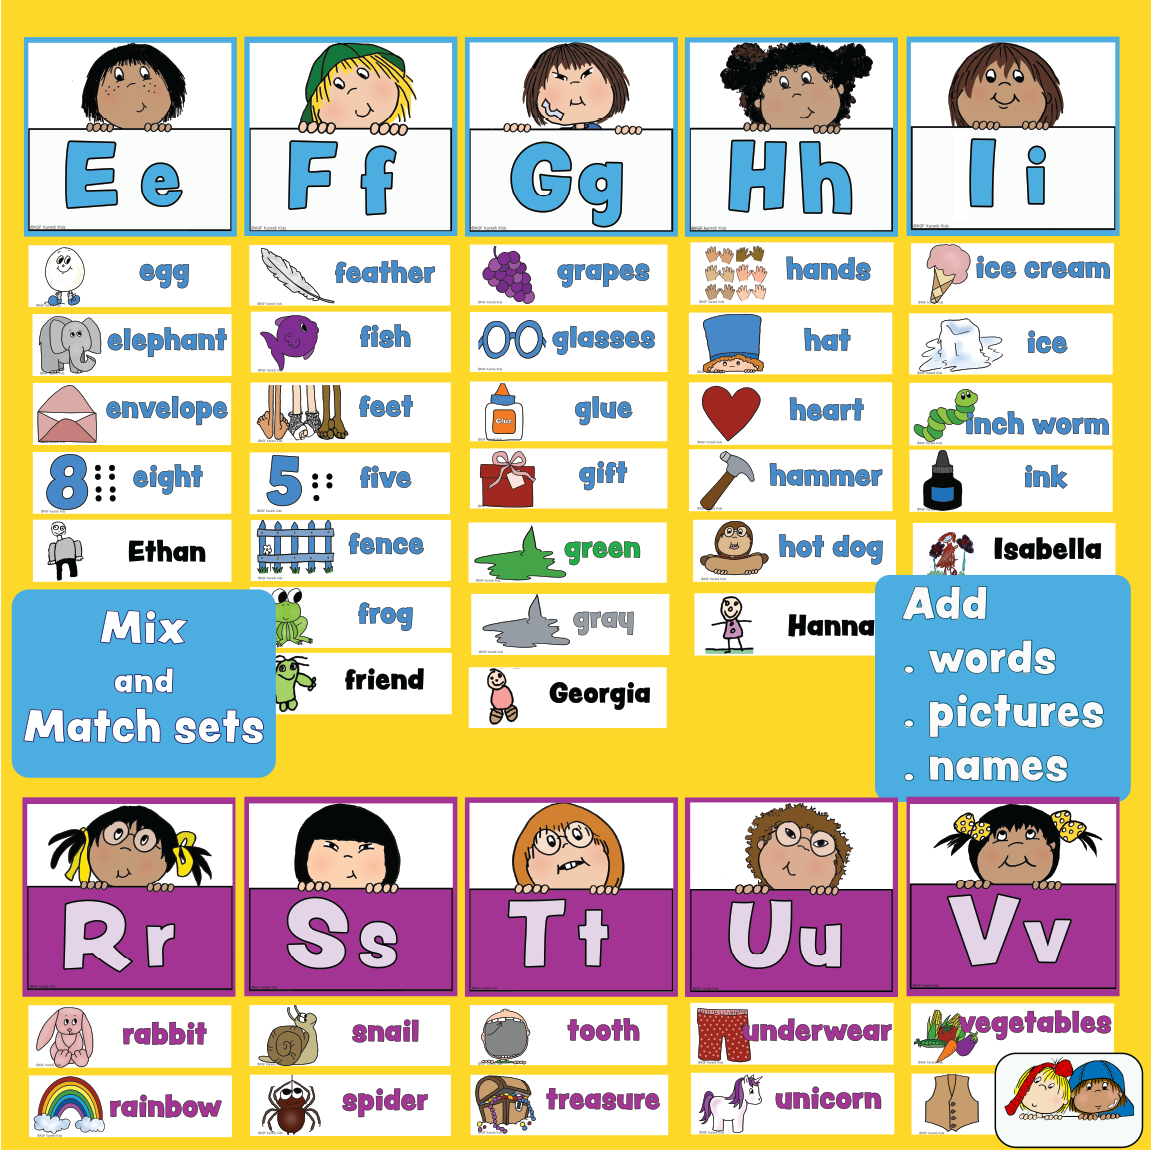 Sample of a colorful bulletin board with 5 kids each holding a large letter. A row of picture-word cards under each letter. 2 color options, one is turquoise and one in purple.